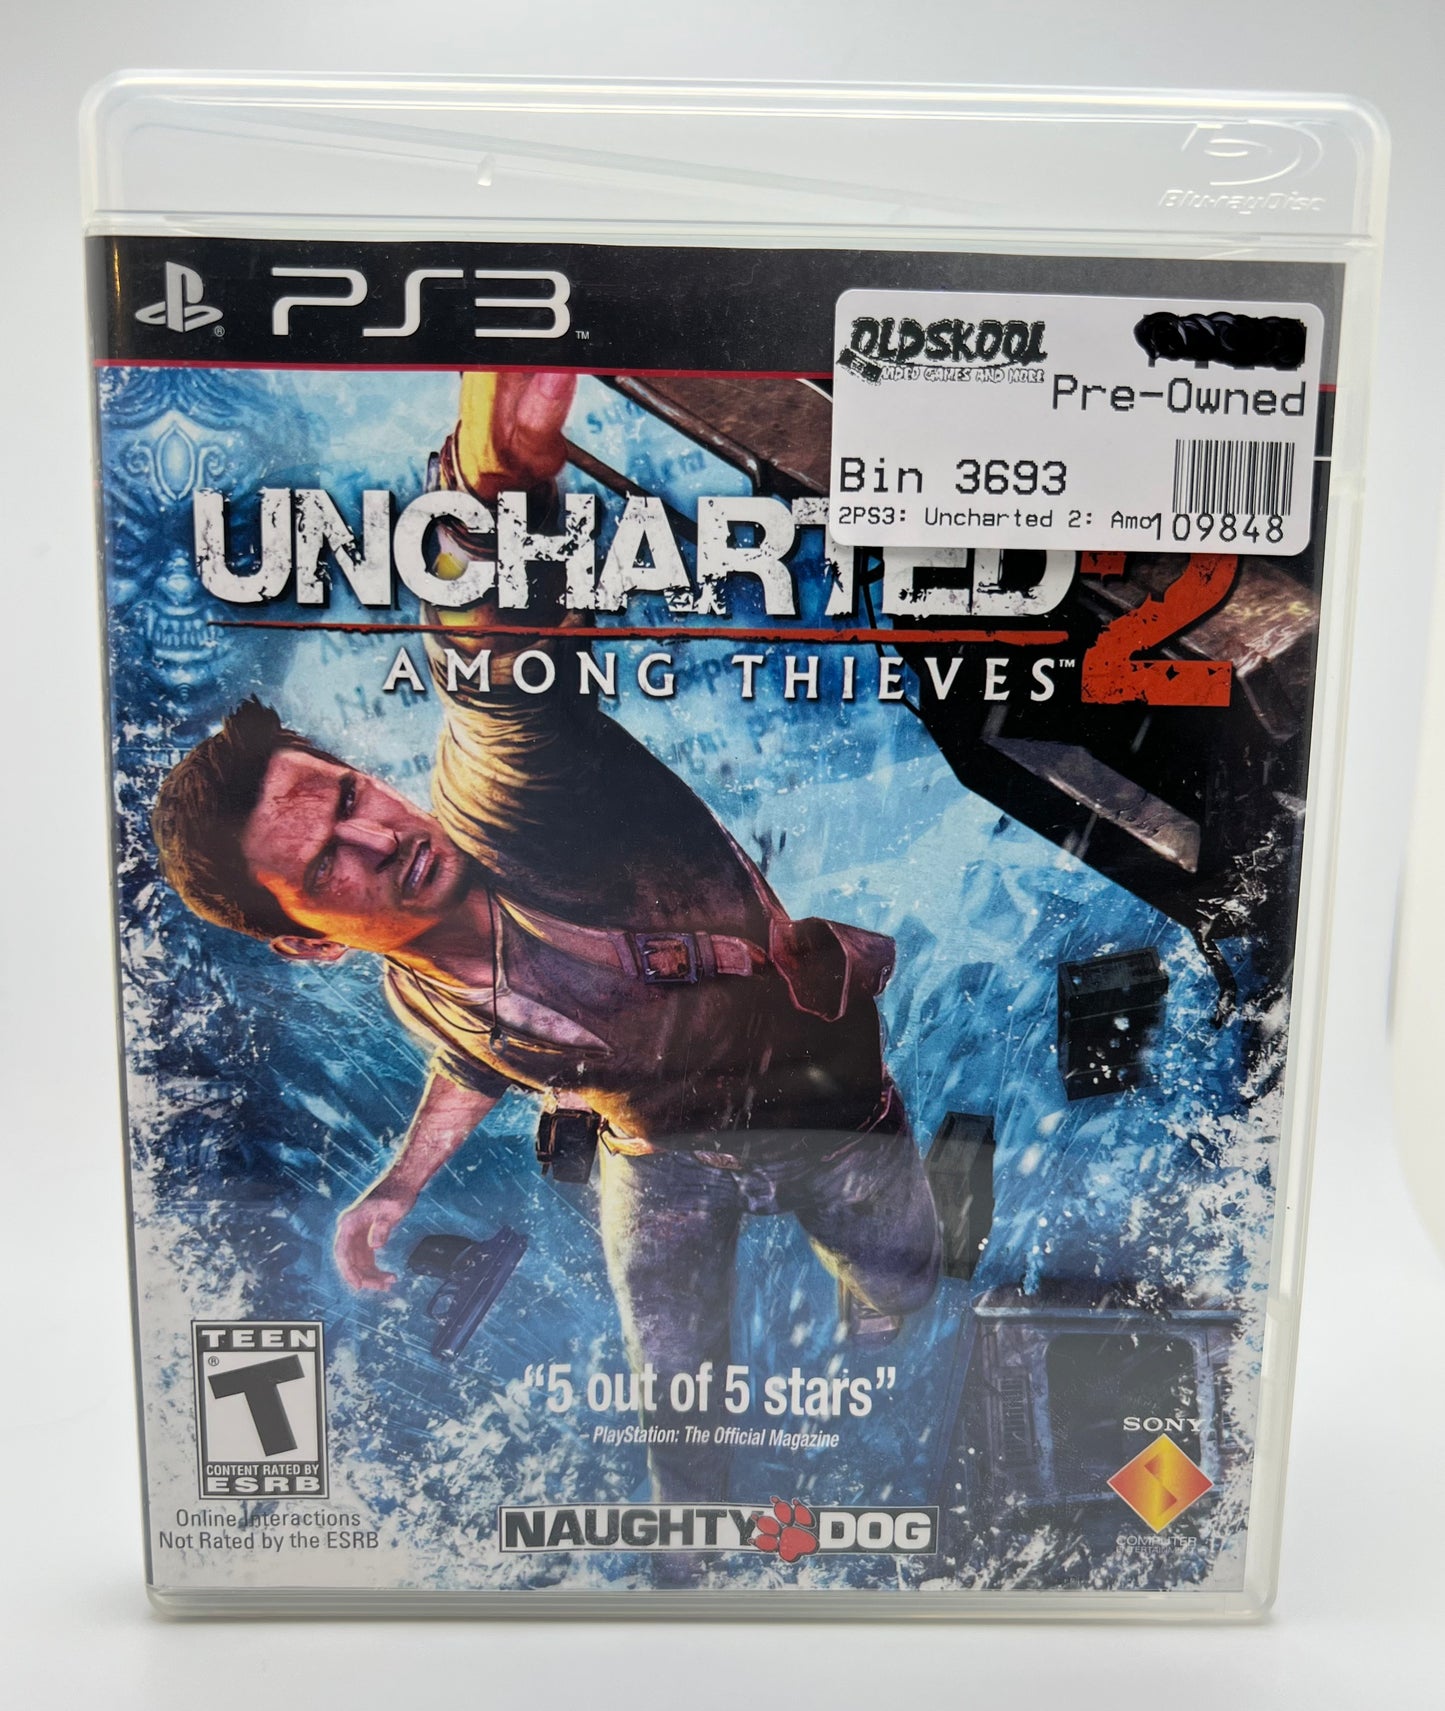 Uncharted 2 - Playstation 3